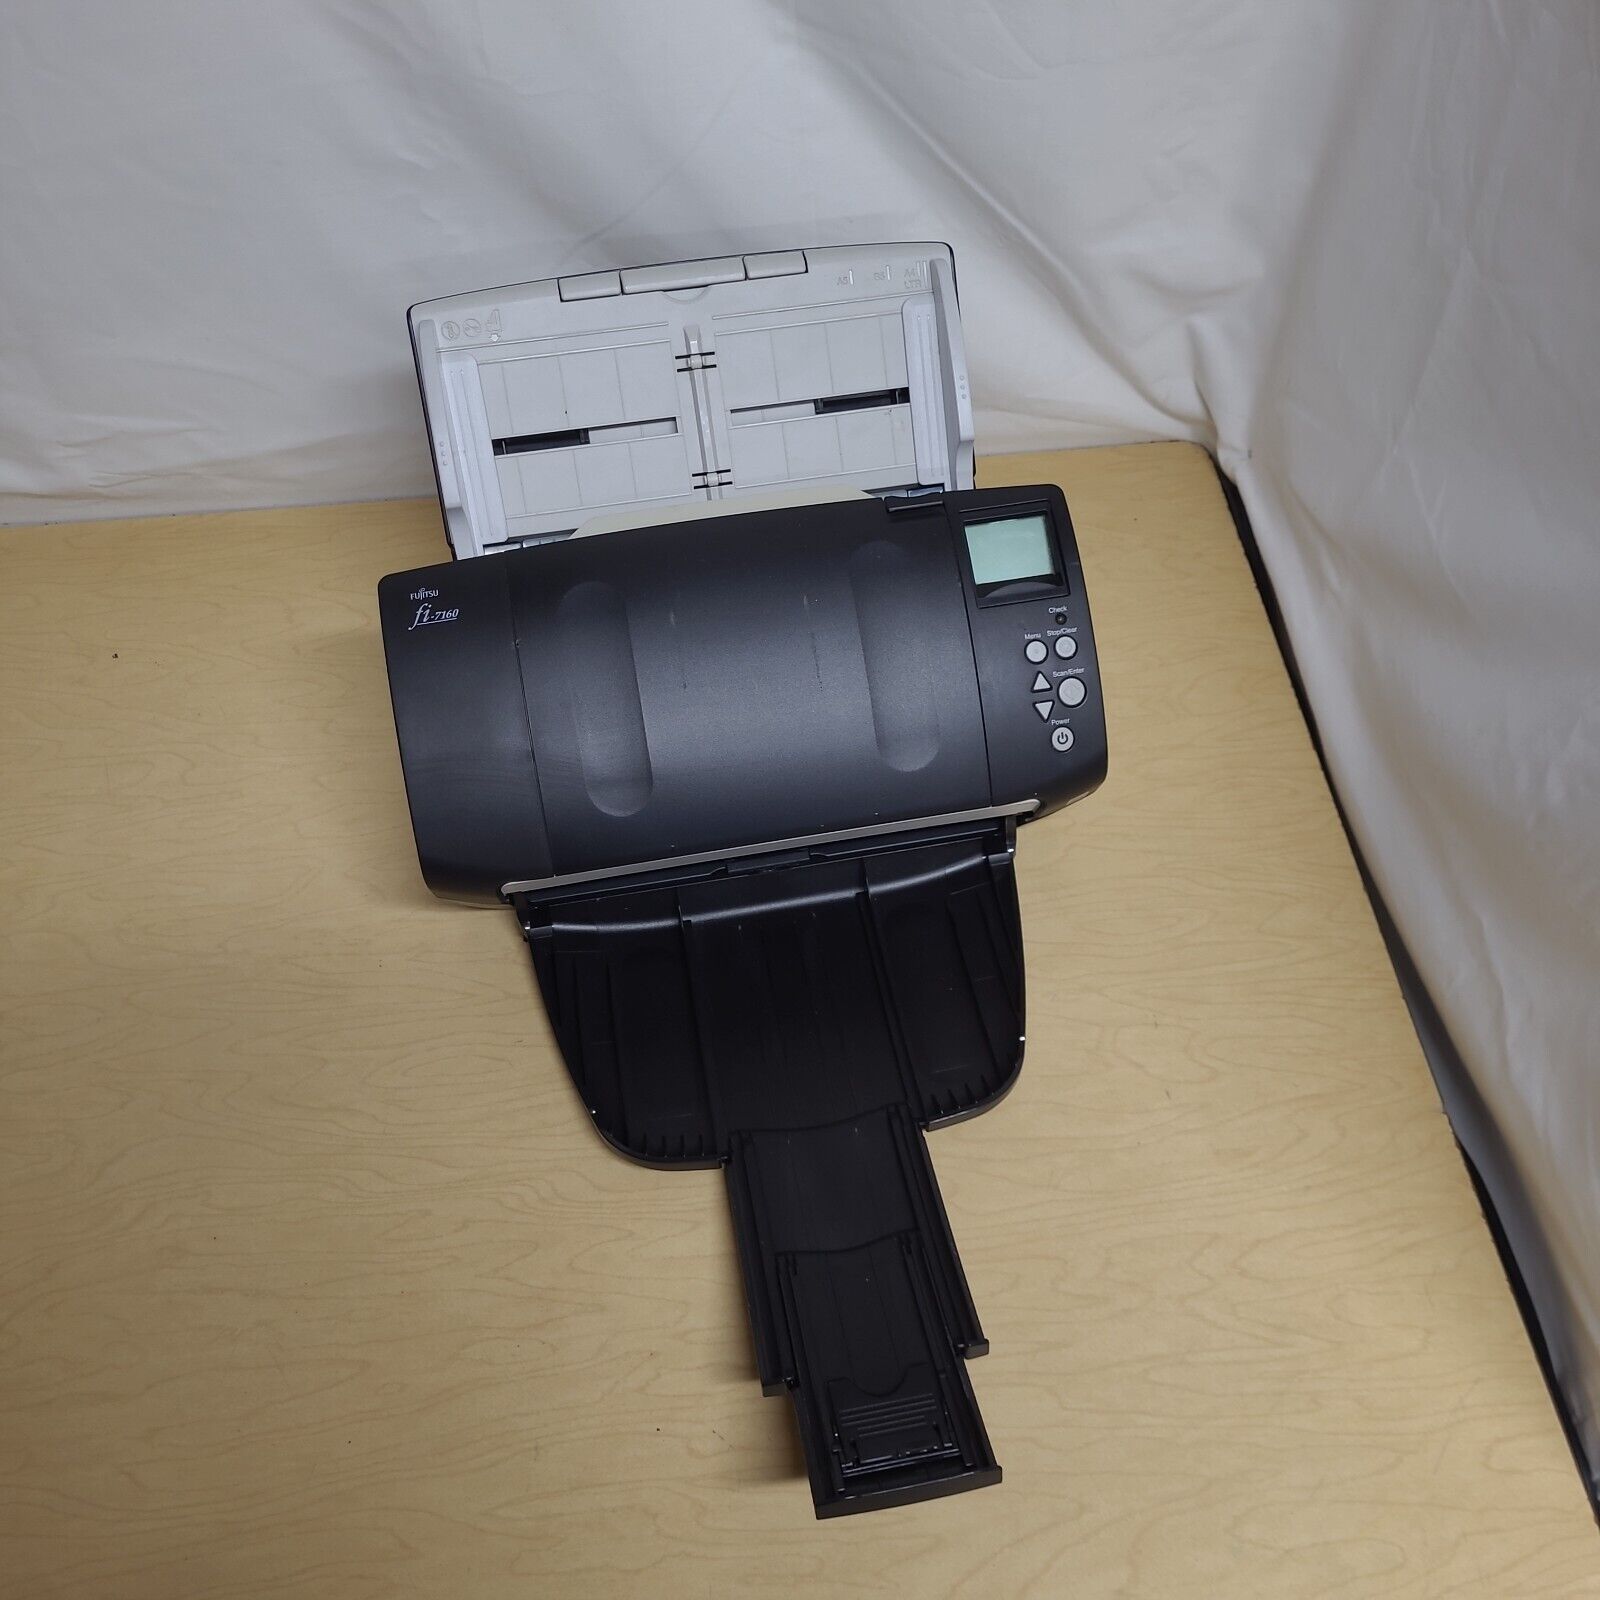 *NO ADAPTER* Fujitsu FI-7160 Color Duplex Document Scanner ONLY 60 SCANS LOW USE